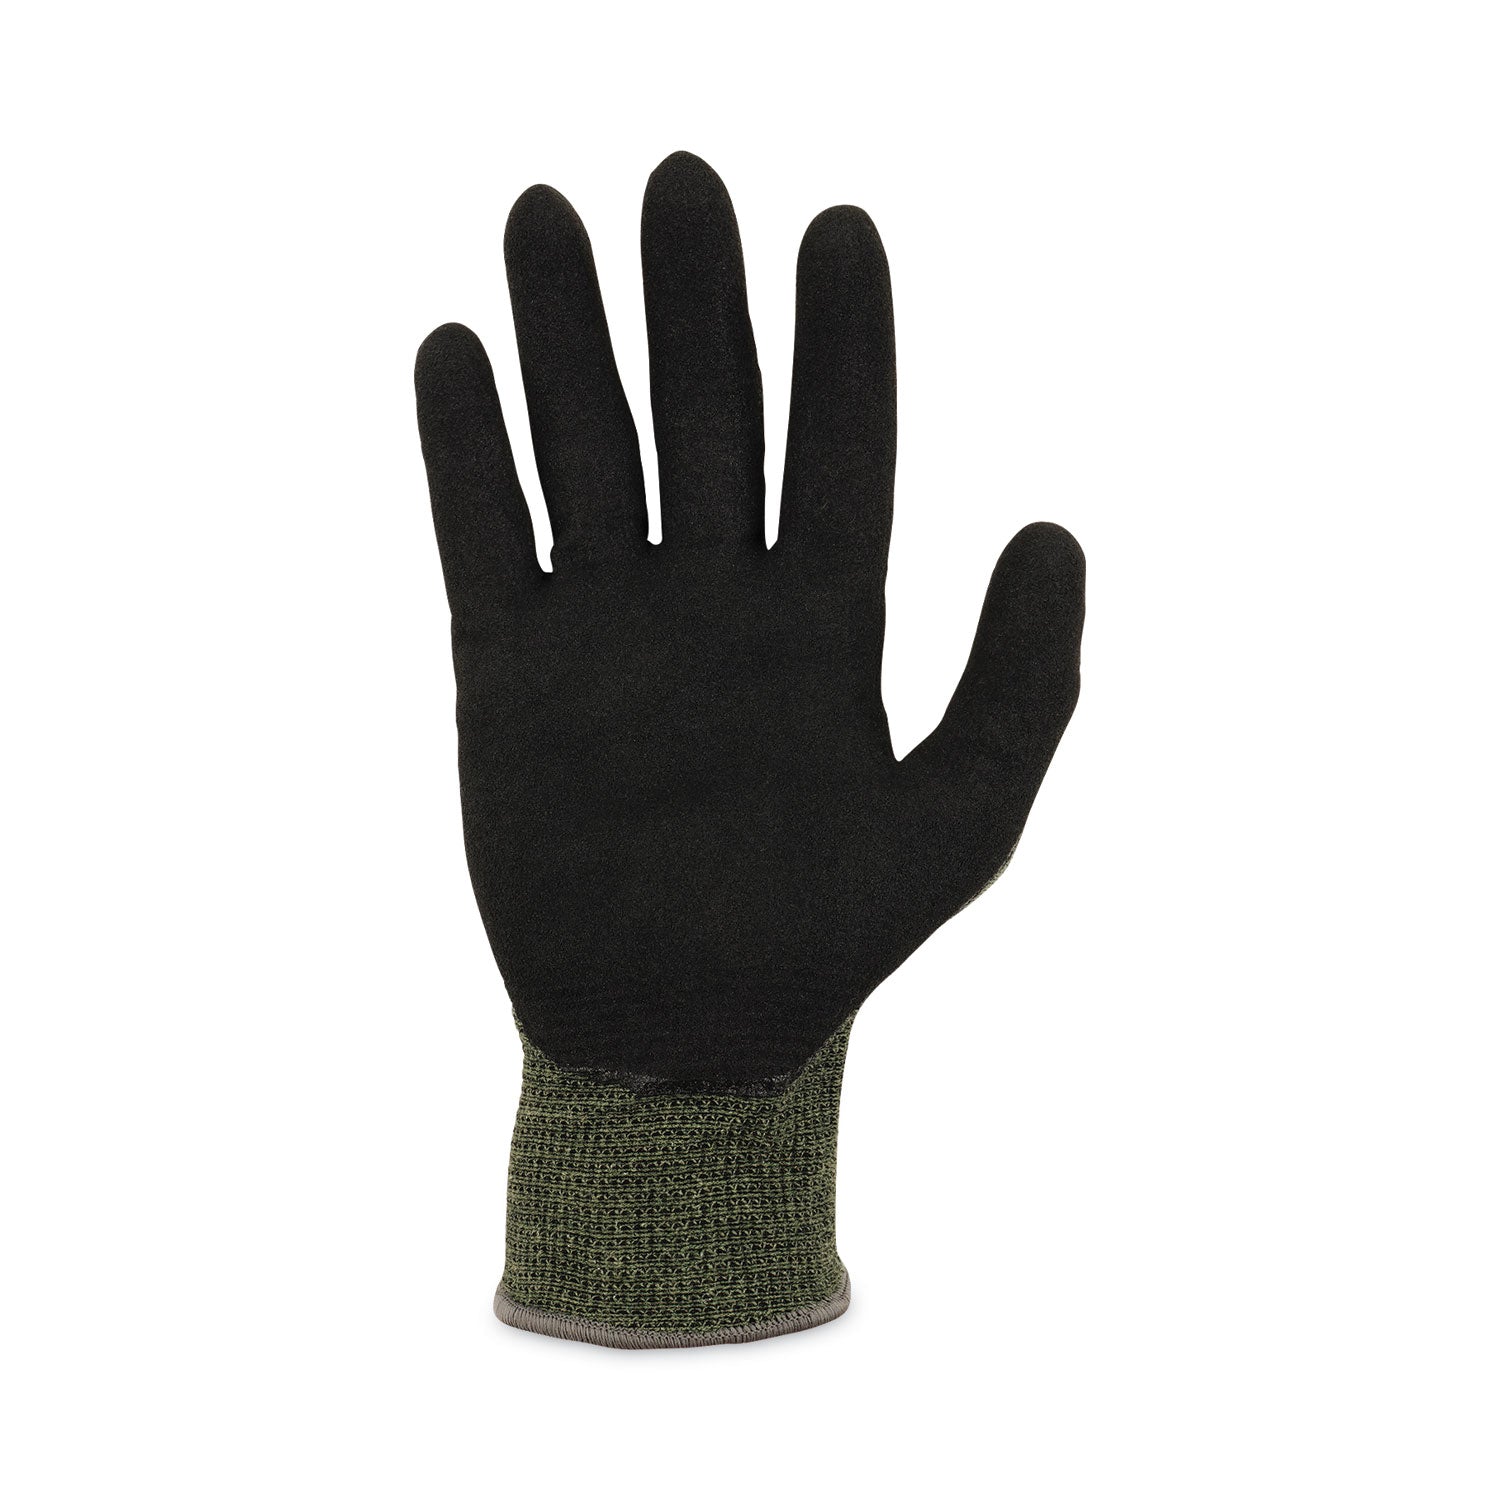 proflex-7042-ansi-a4-nitrile-coated-cr-gloves-green-small-12-pairs-pack-ships-in-1-3-business-days_ego10332 - 5